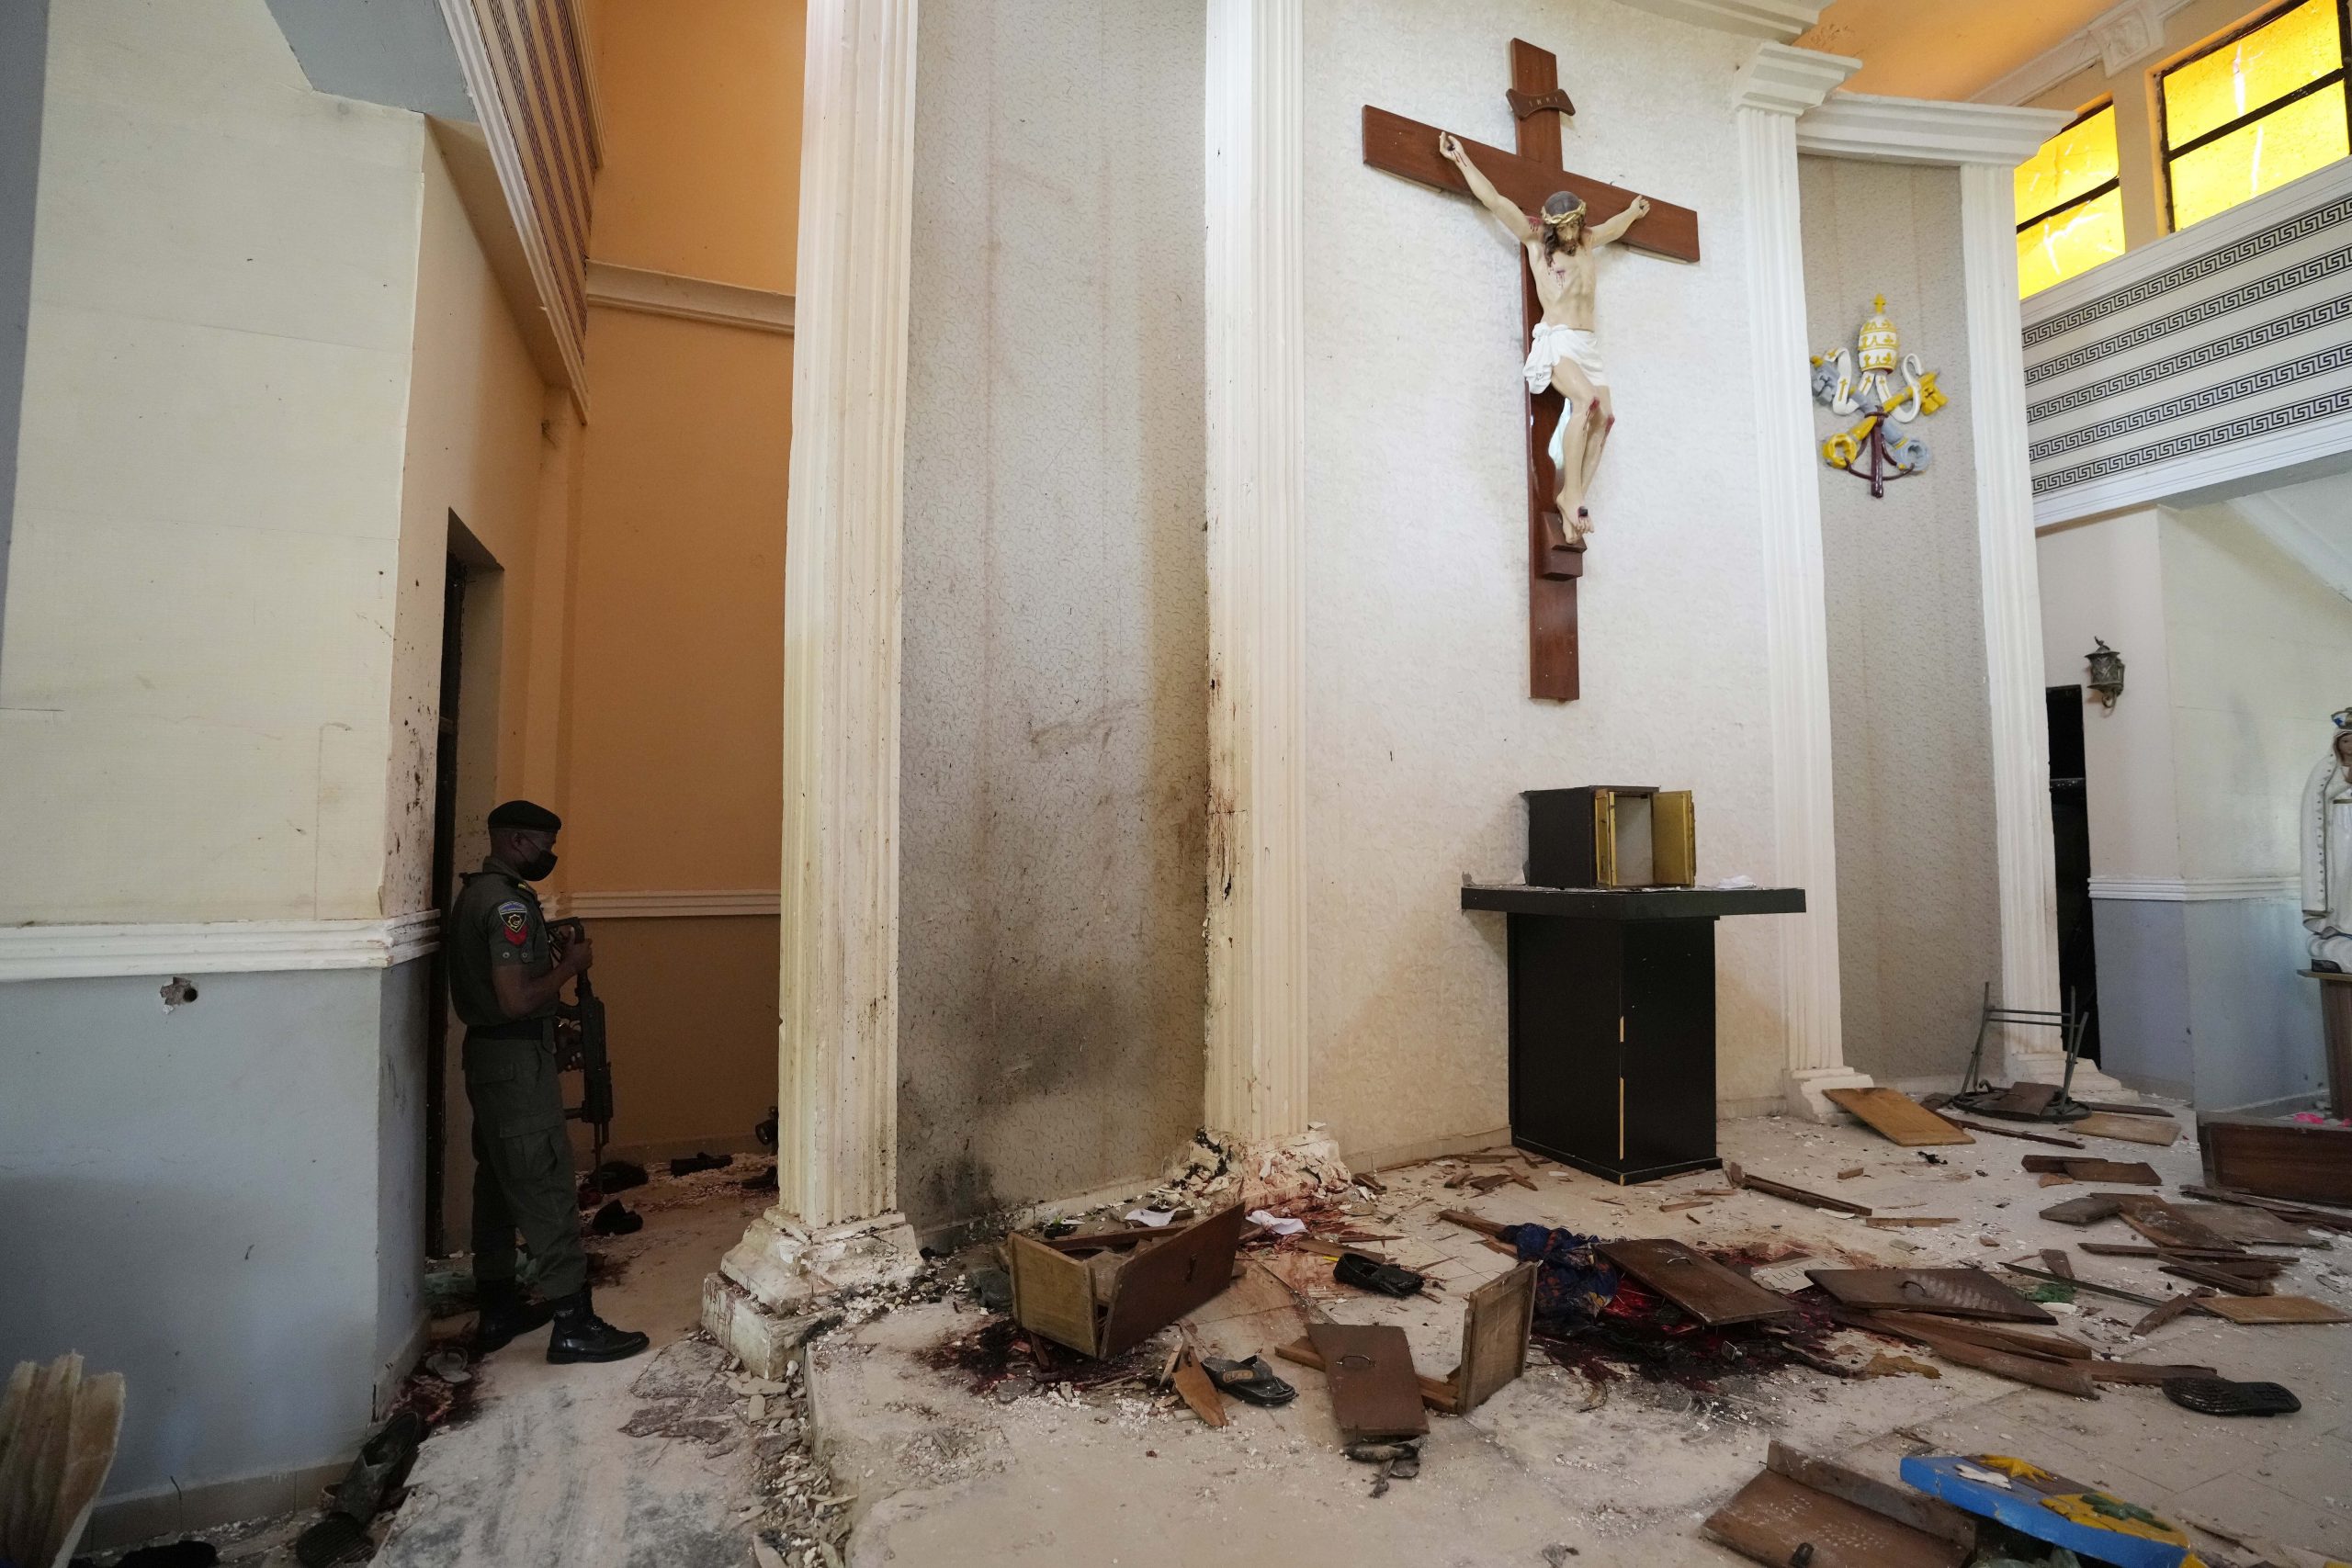 Massacre of Christians in Nigeria: Hungary Offers HUF 10 Million in Emergency Aid